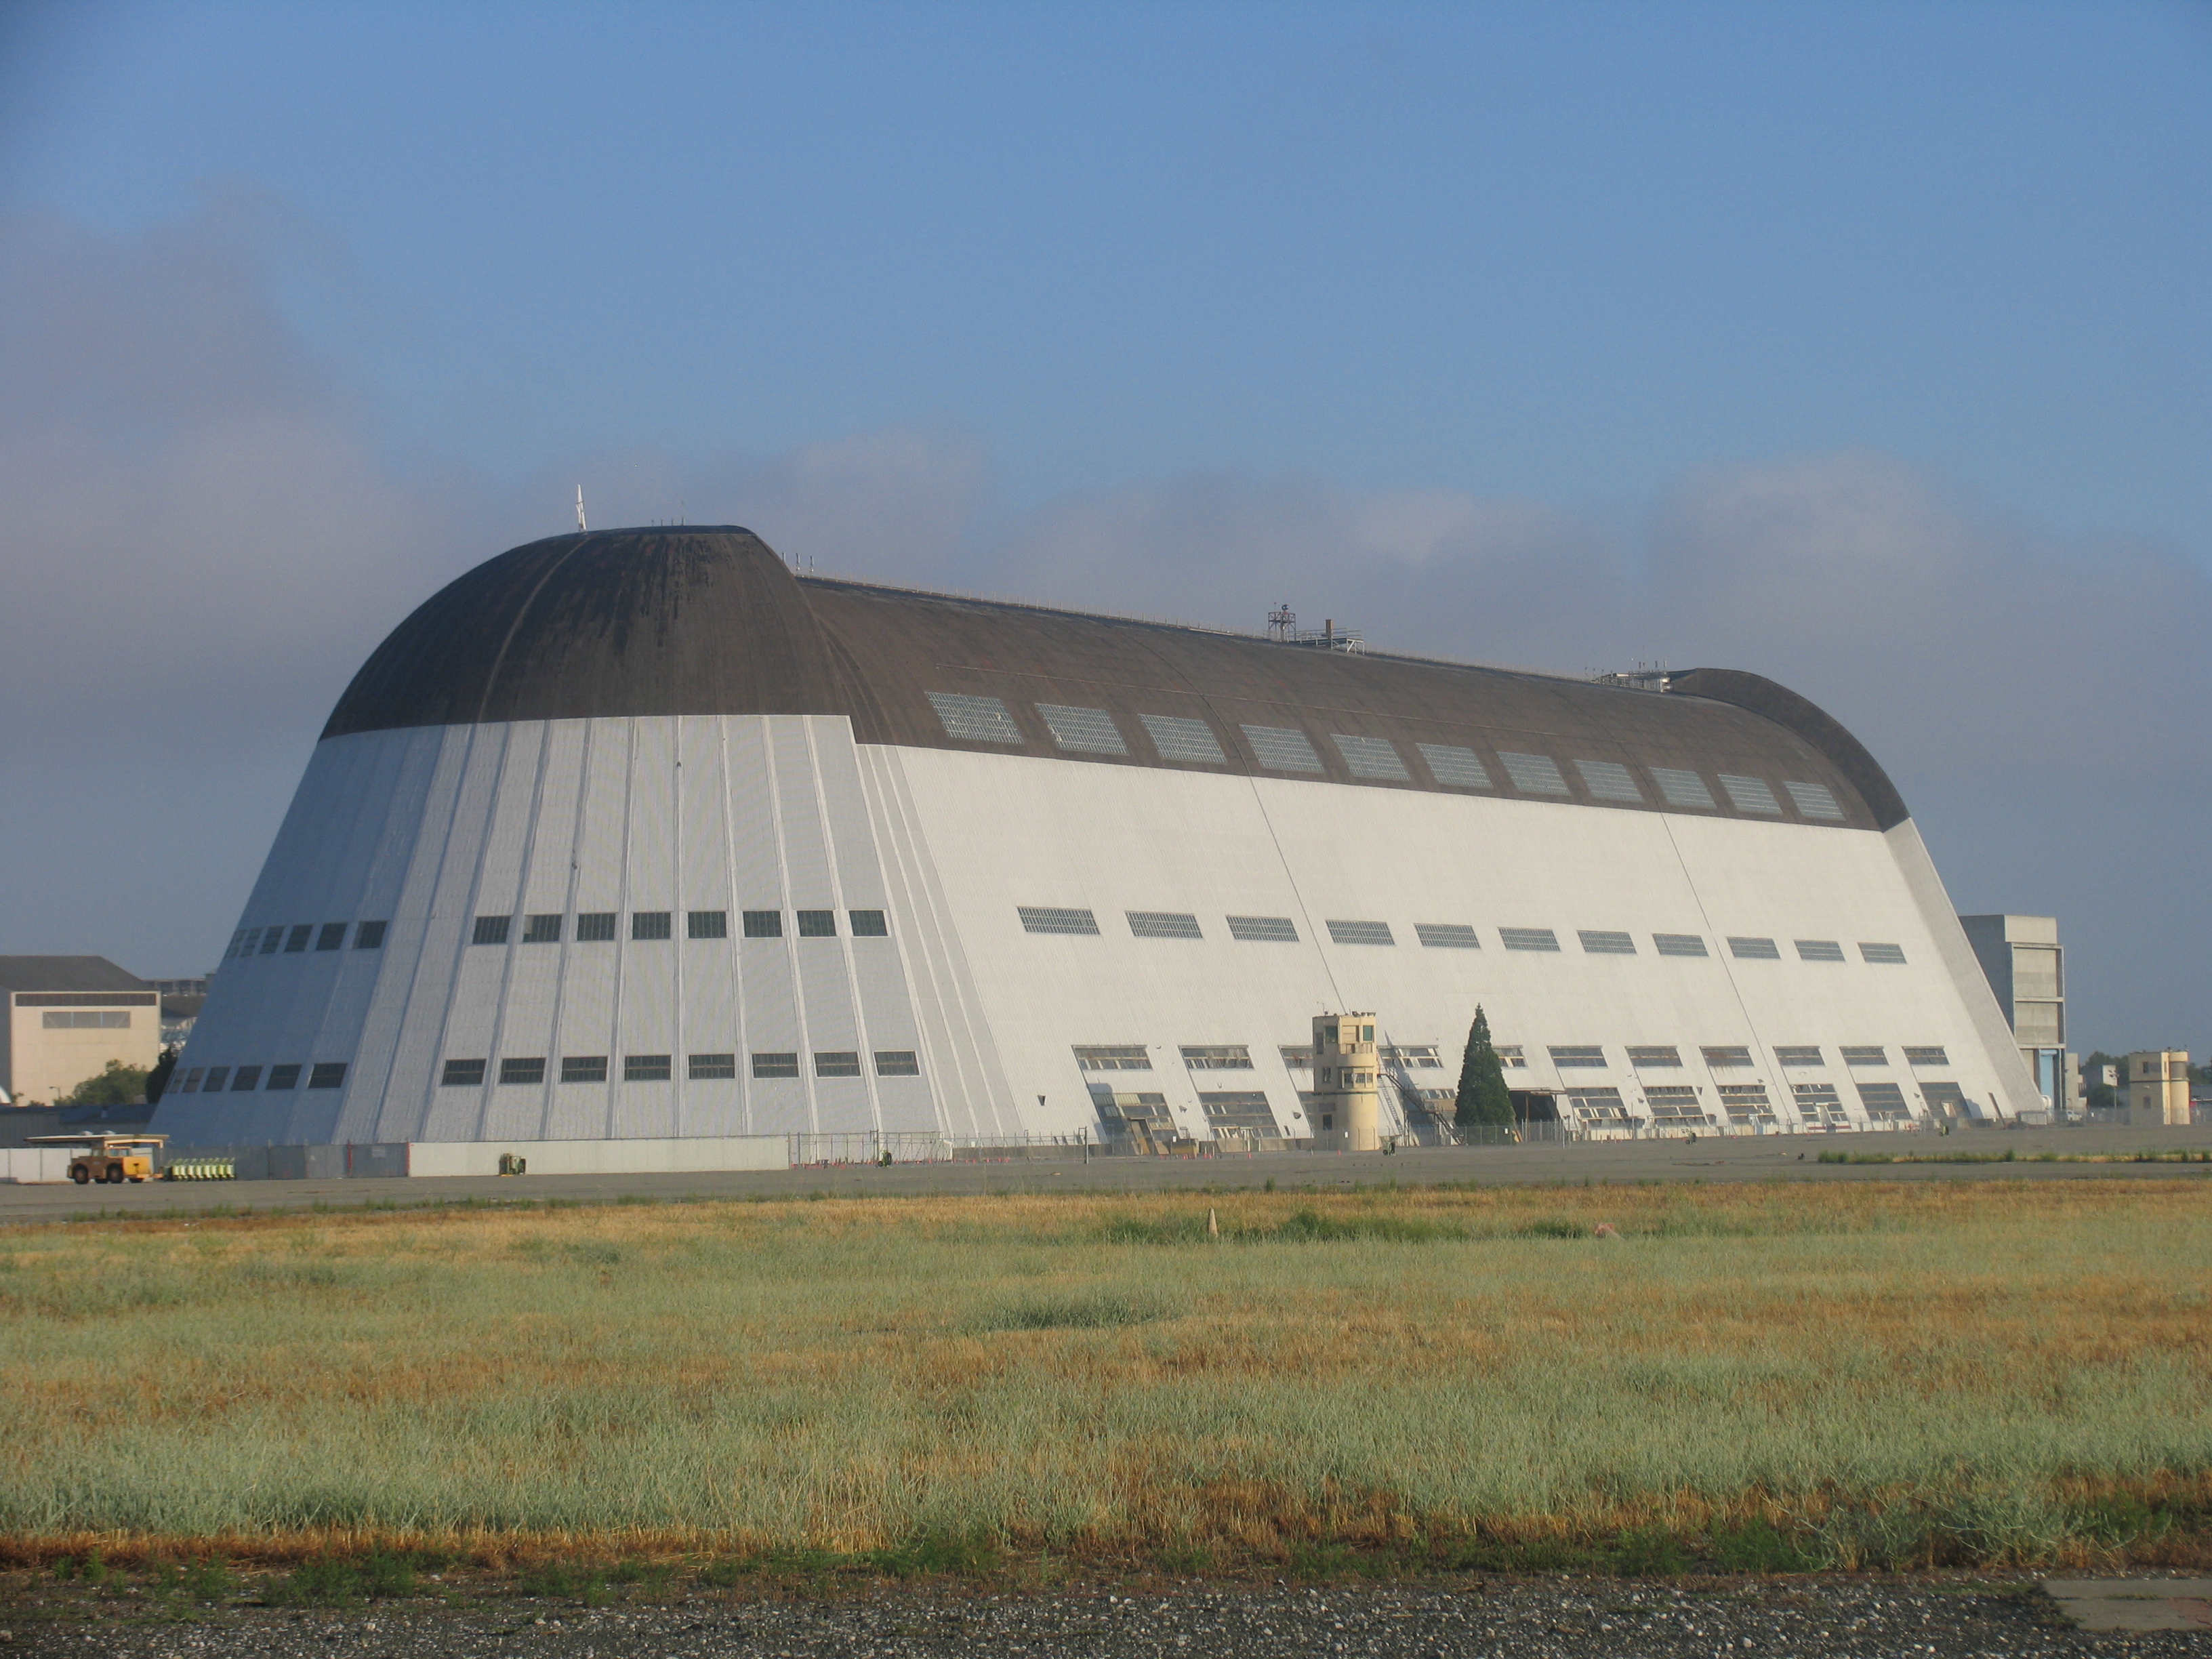 Hangar 1 side and end view, building skin intact